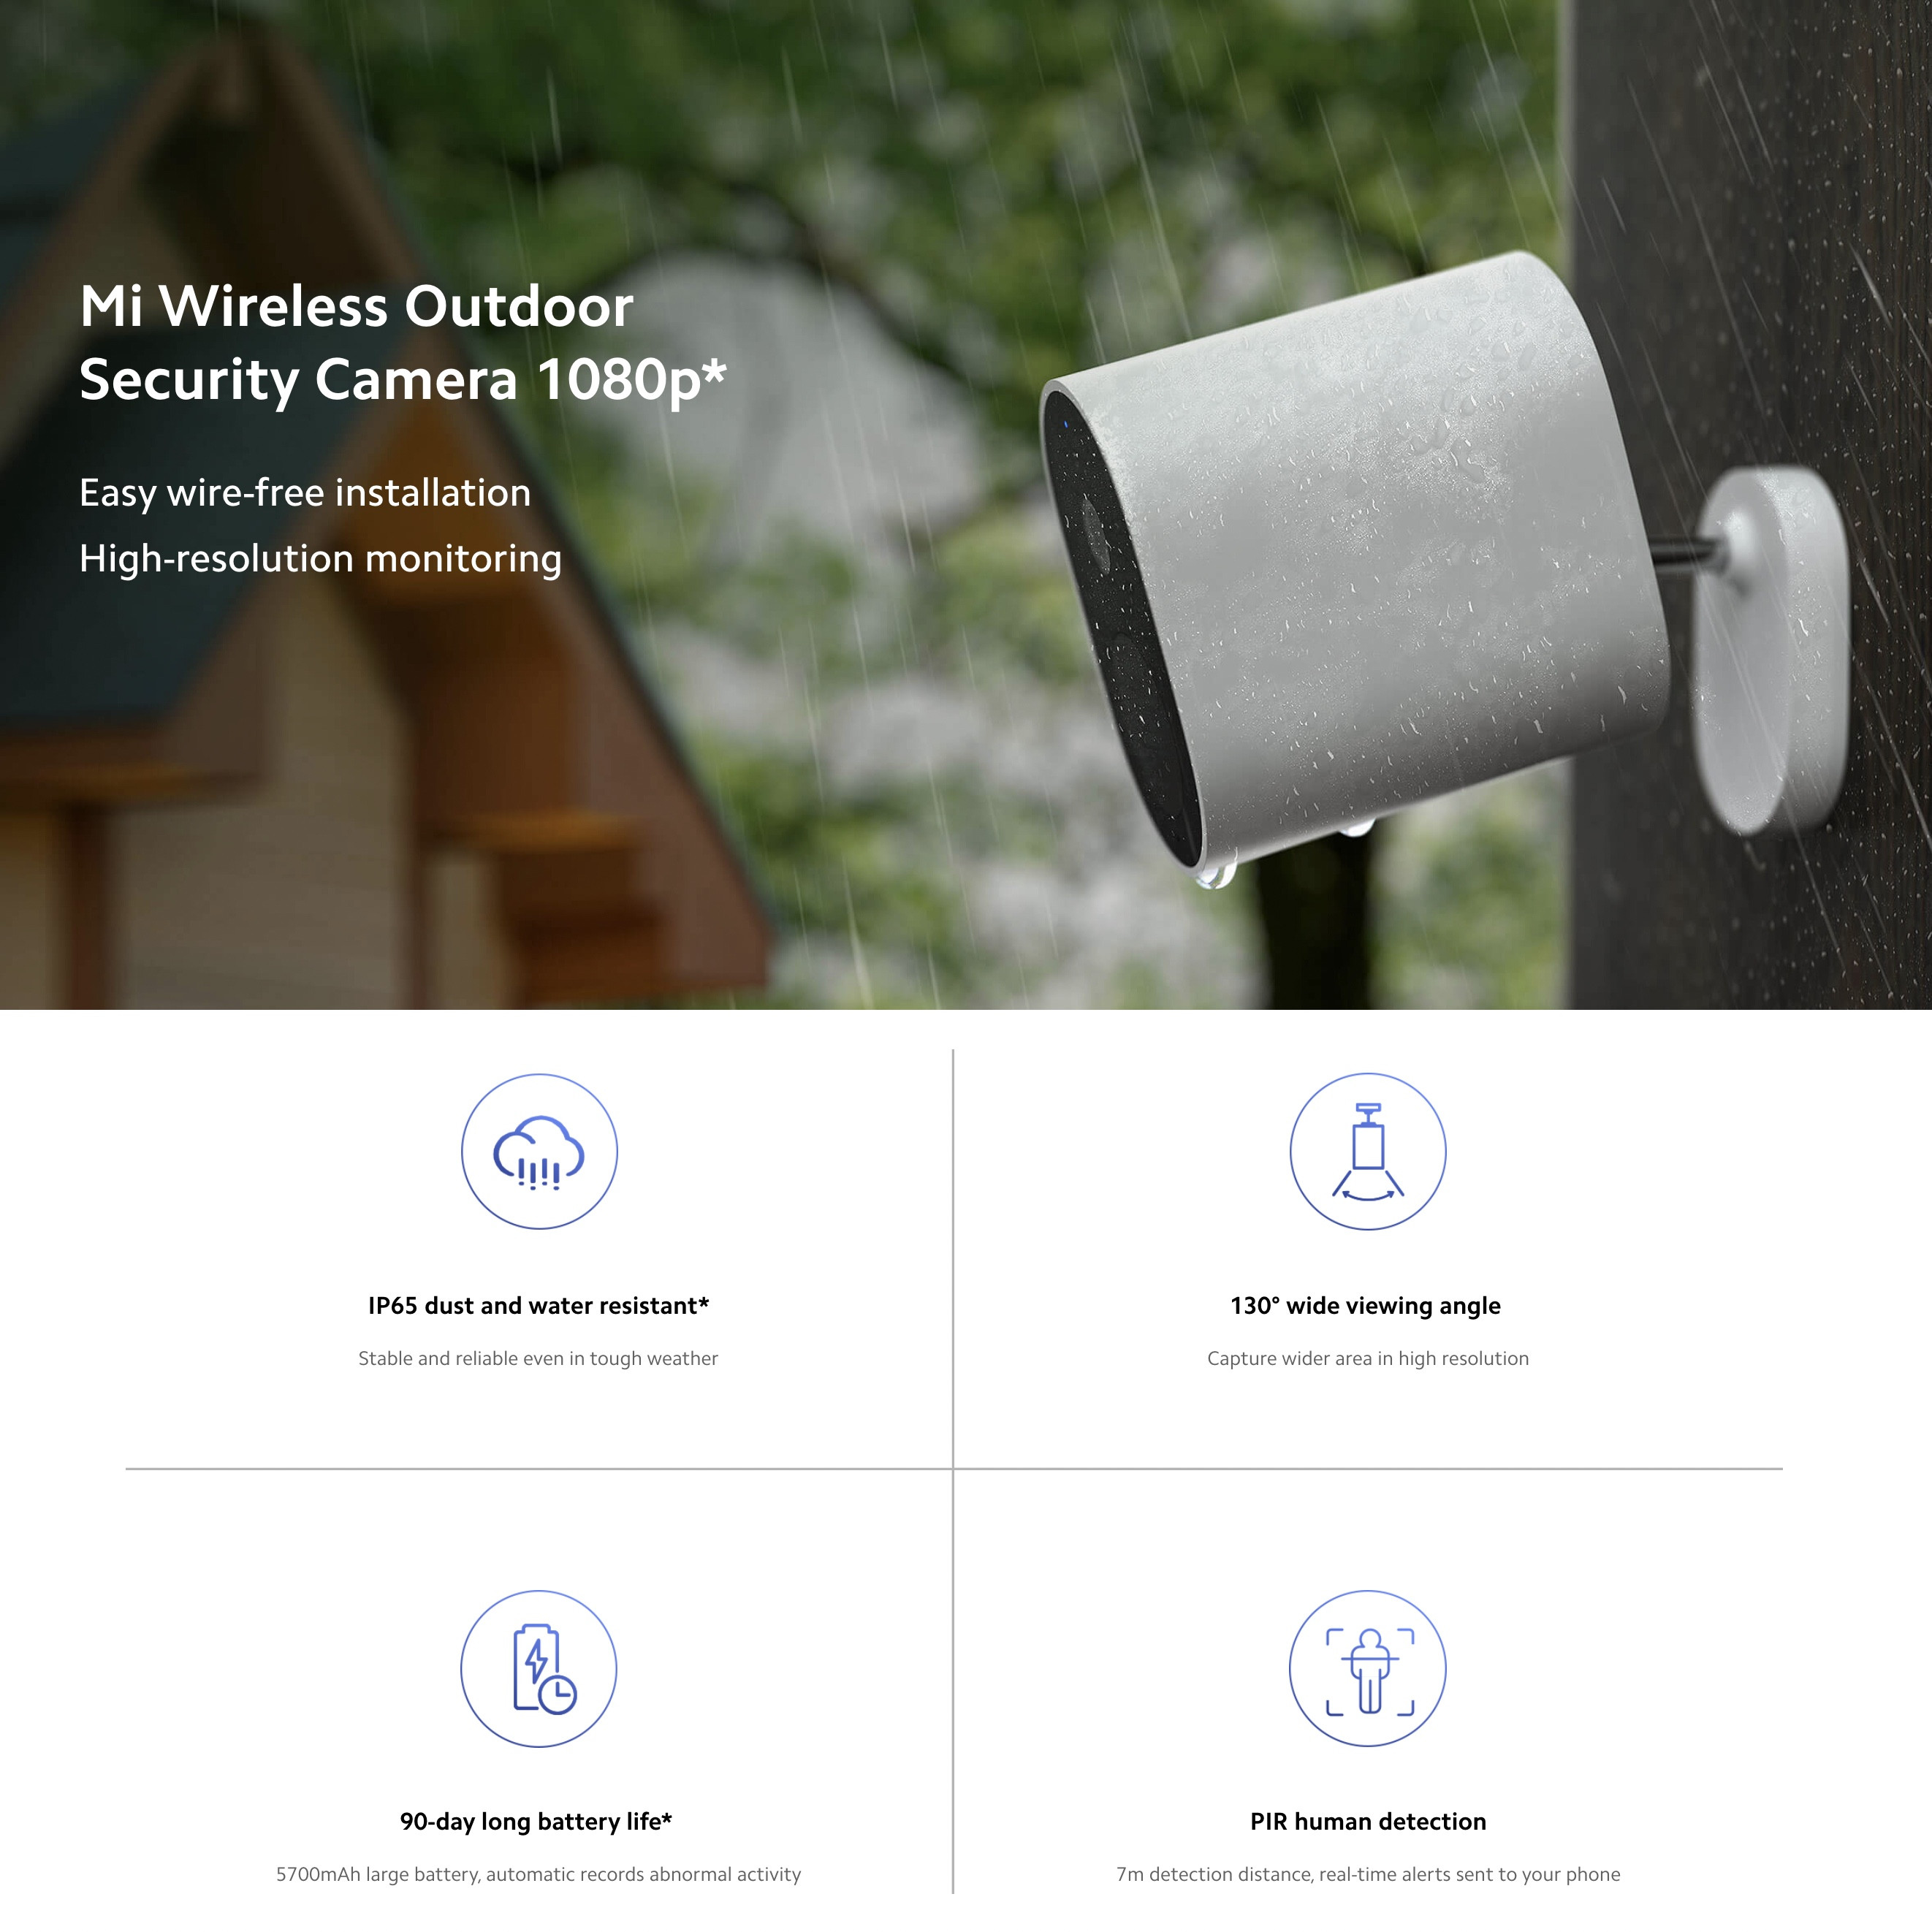  Mi Wireless Outdoor Security Camera 1080P MWC14 - Smart Home .